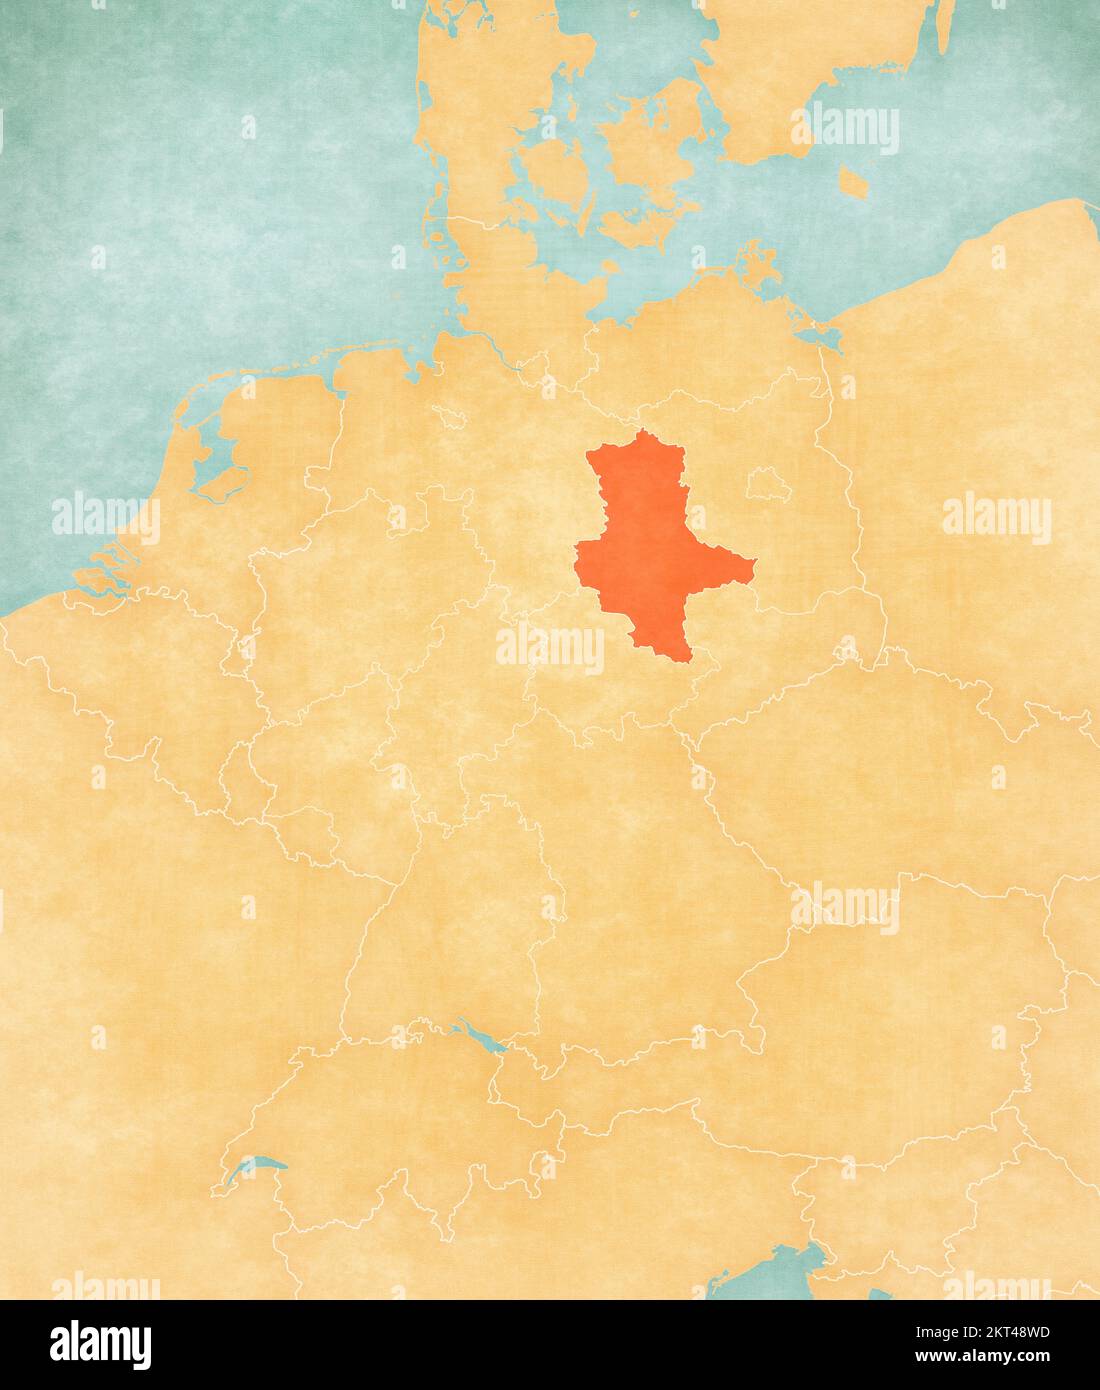 Saxony-Anhalt on the map of Germany in soft grunge and vintage style, like old paper with watercolor painting. Stock Photo